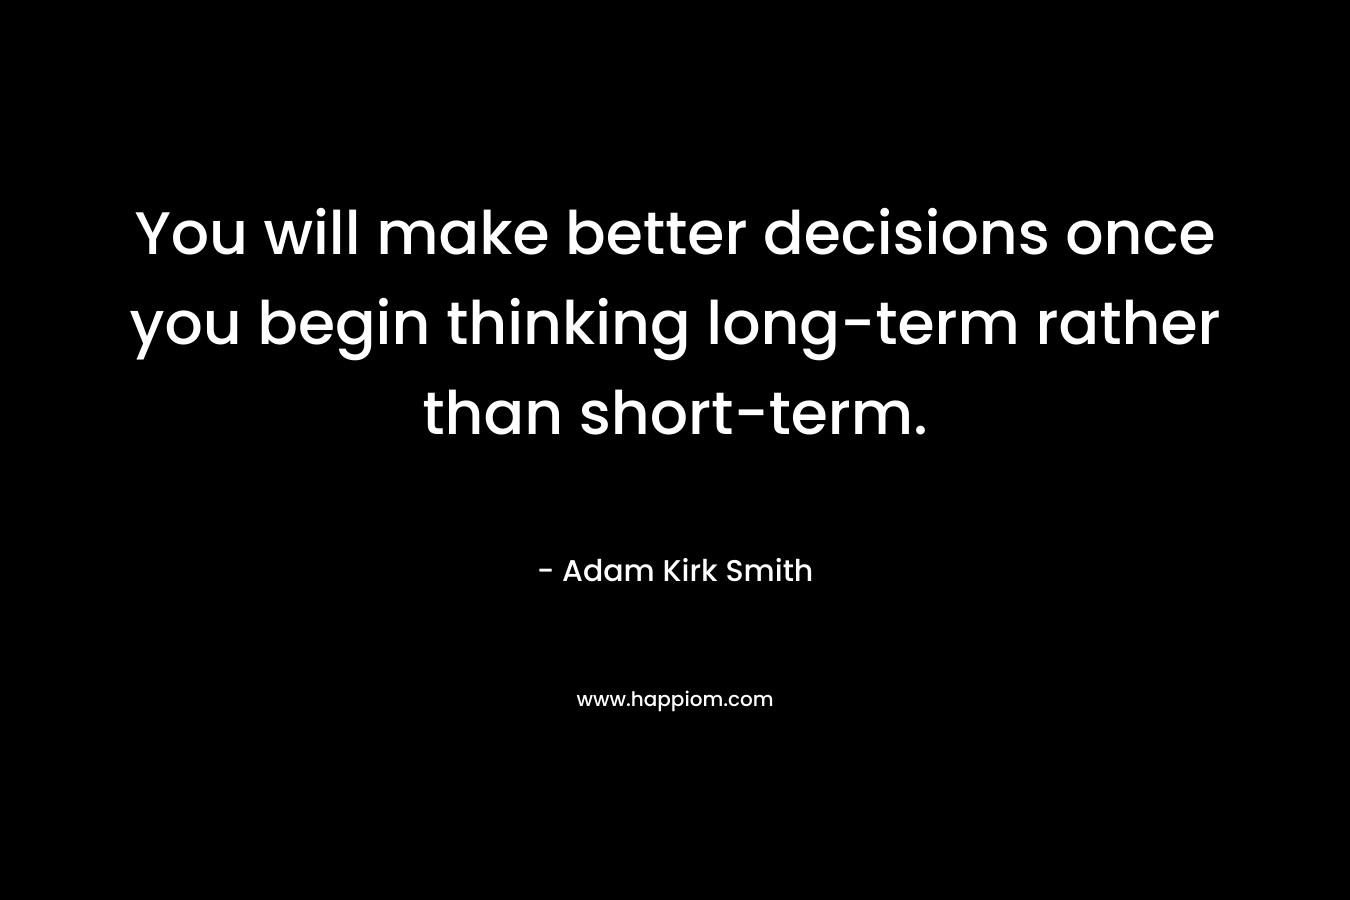 You will make better decisions once you begin thinking long-term rather than short-term. – Adam Kirk Smith